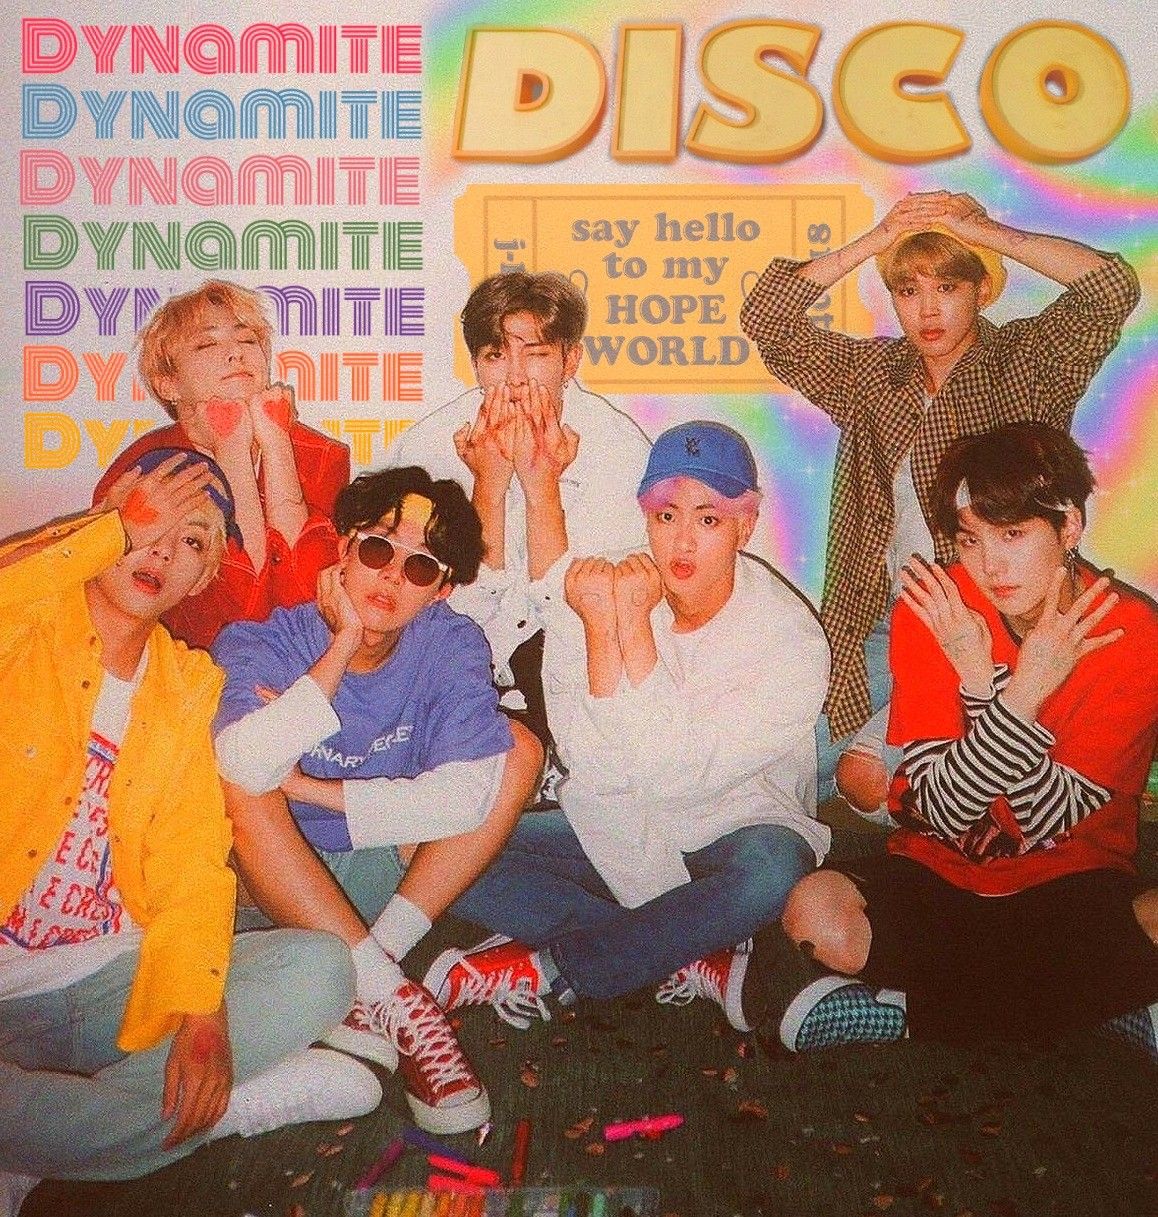 Bts aesthetic colorful edit. Bts aesthetic picture, Indie kids, Bts picture